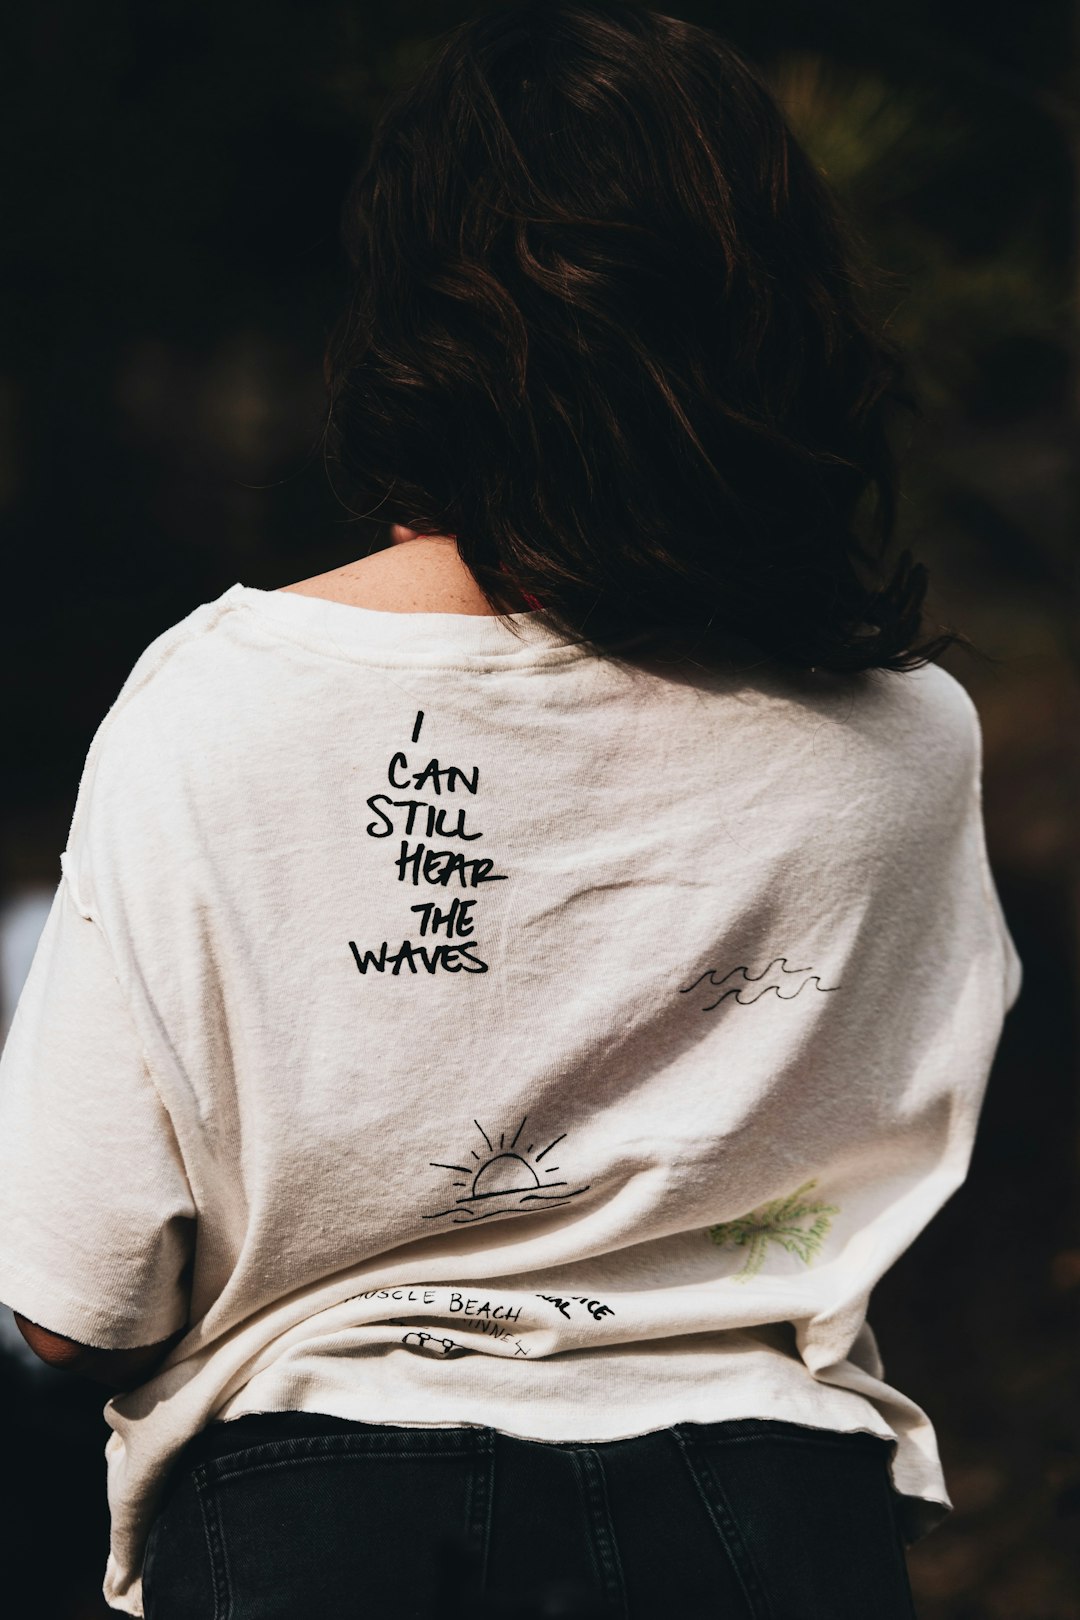 woman in white and black crew neck t-shirt